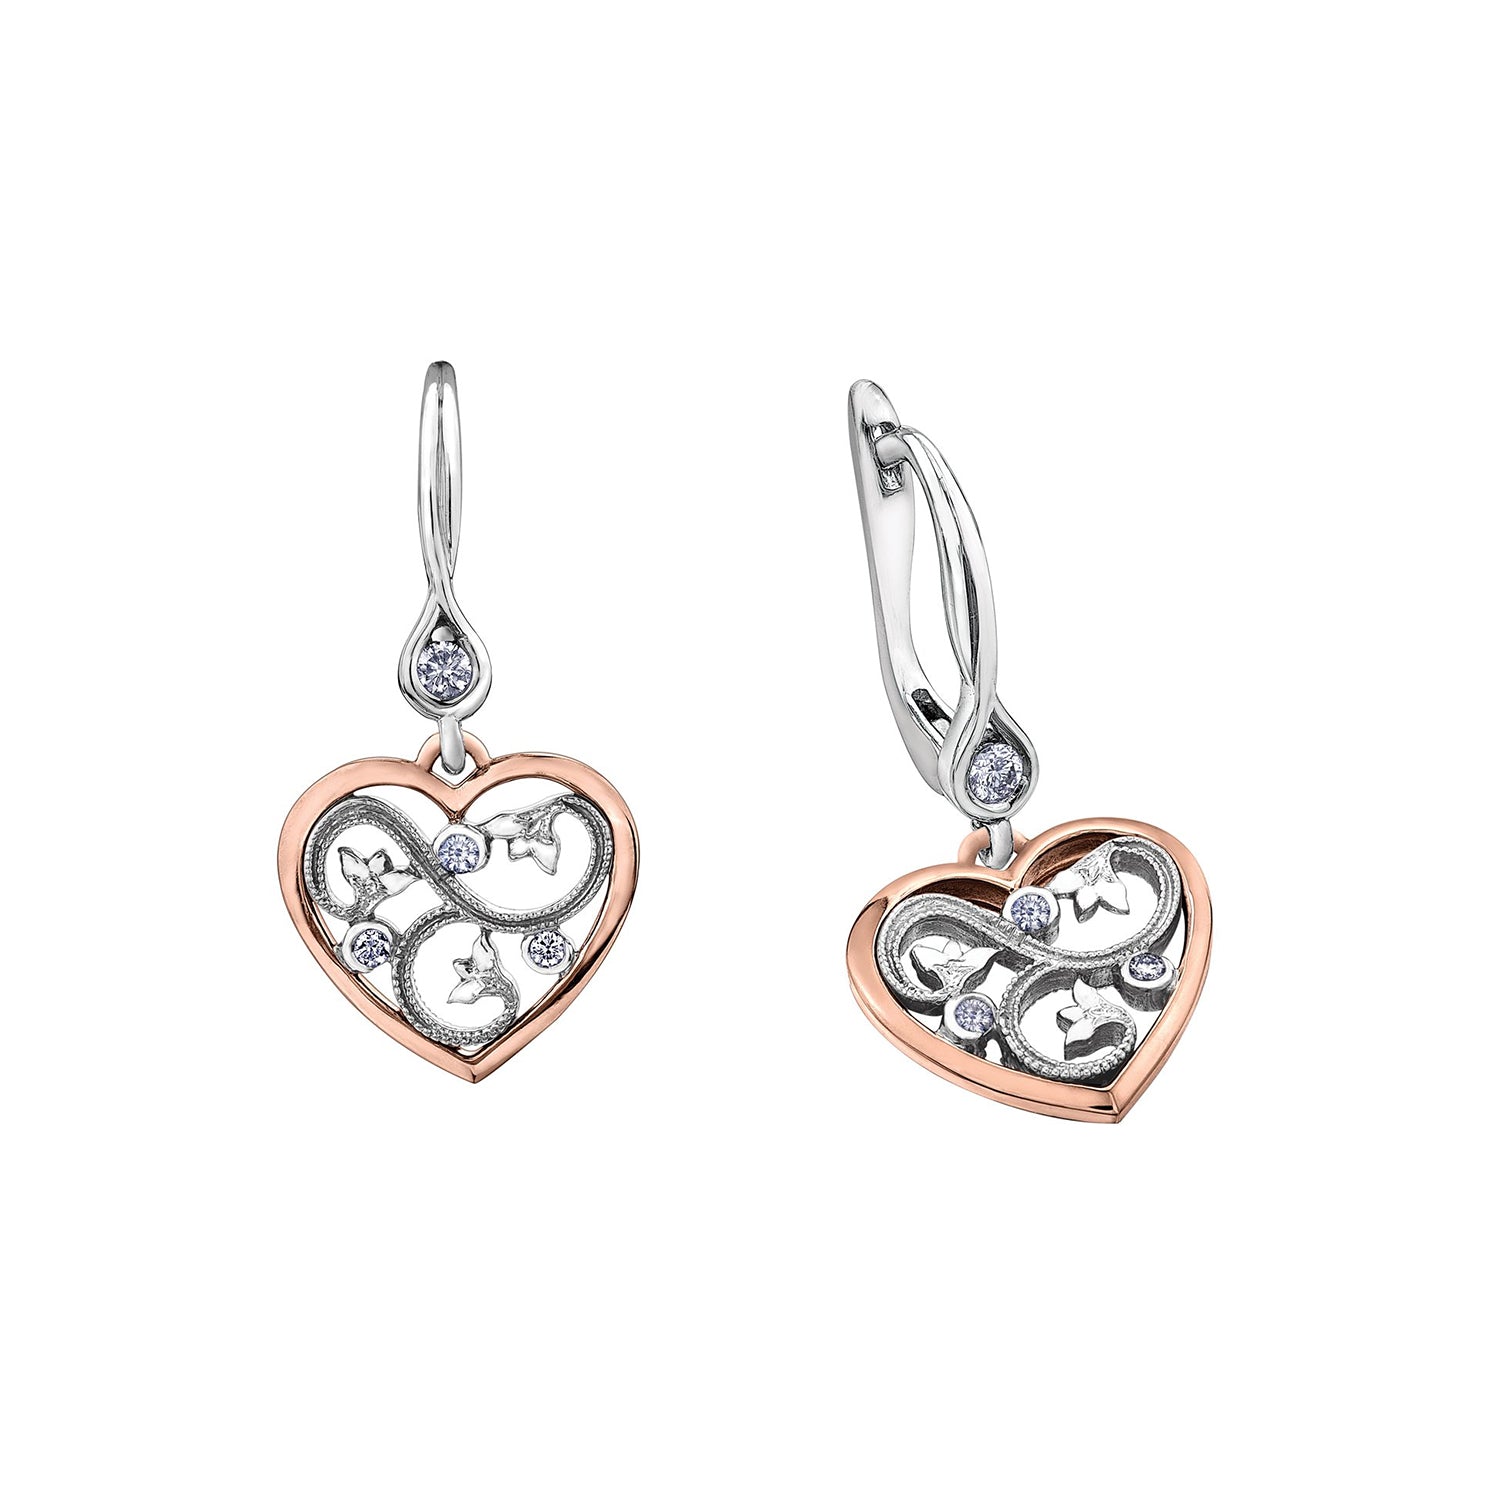 Crafted in 14KT white and rose Certified Canadian Gold, these drop earrings feature a rose vine design set with round brilliant Canadian diamonds all enclosed in heart shapes.